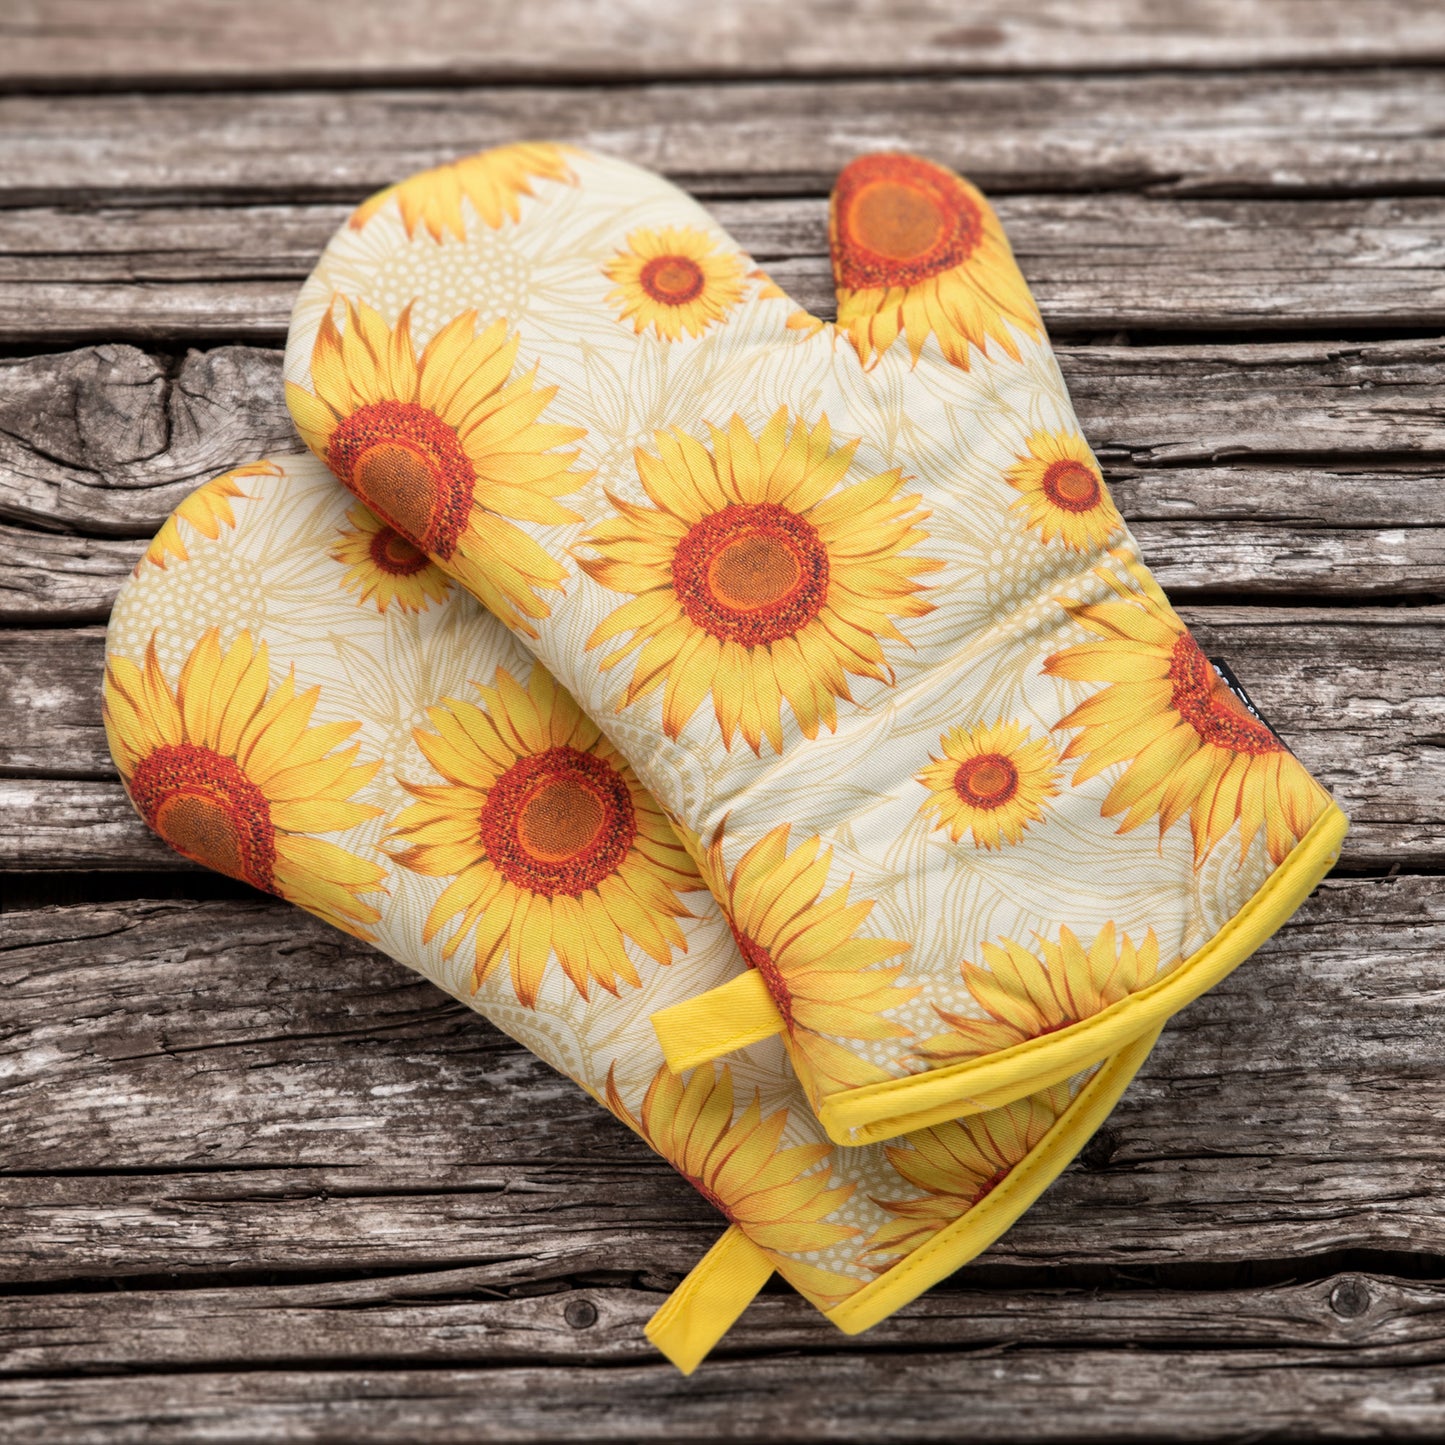 Summer Sunflowers Oven Mitts And Potholder Set – Oven Mitts Co.